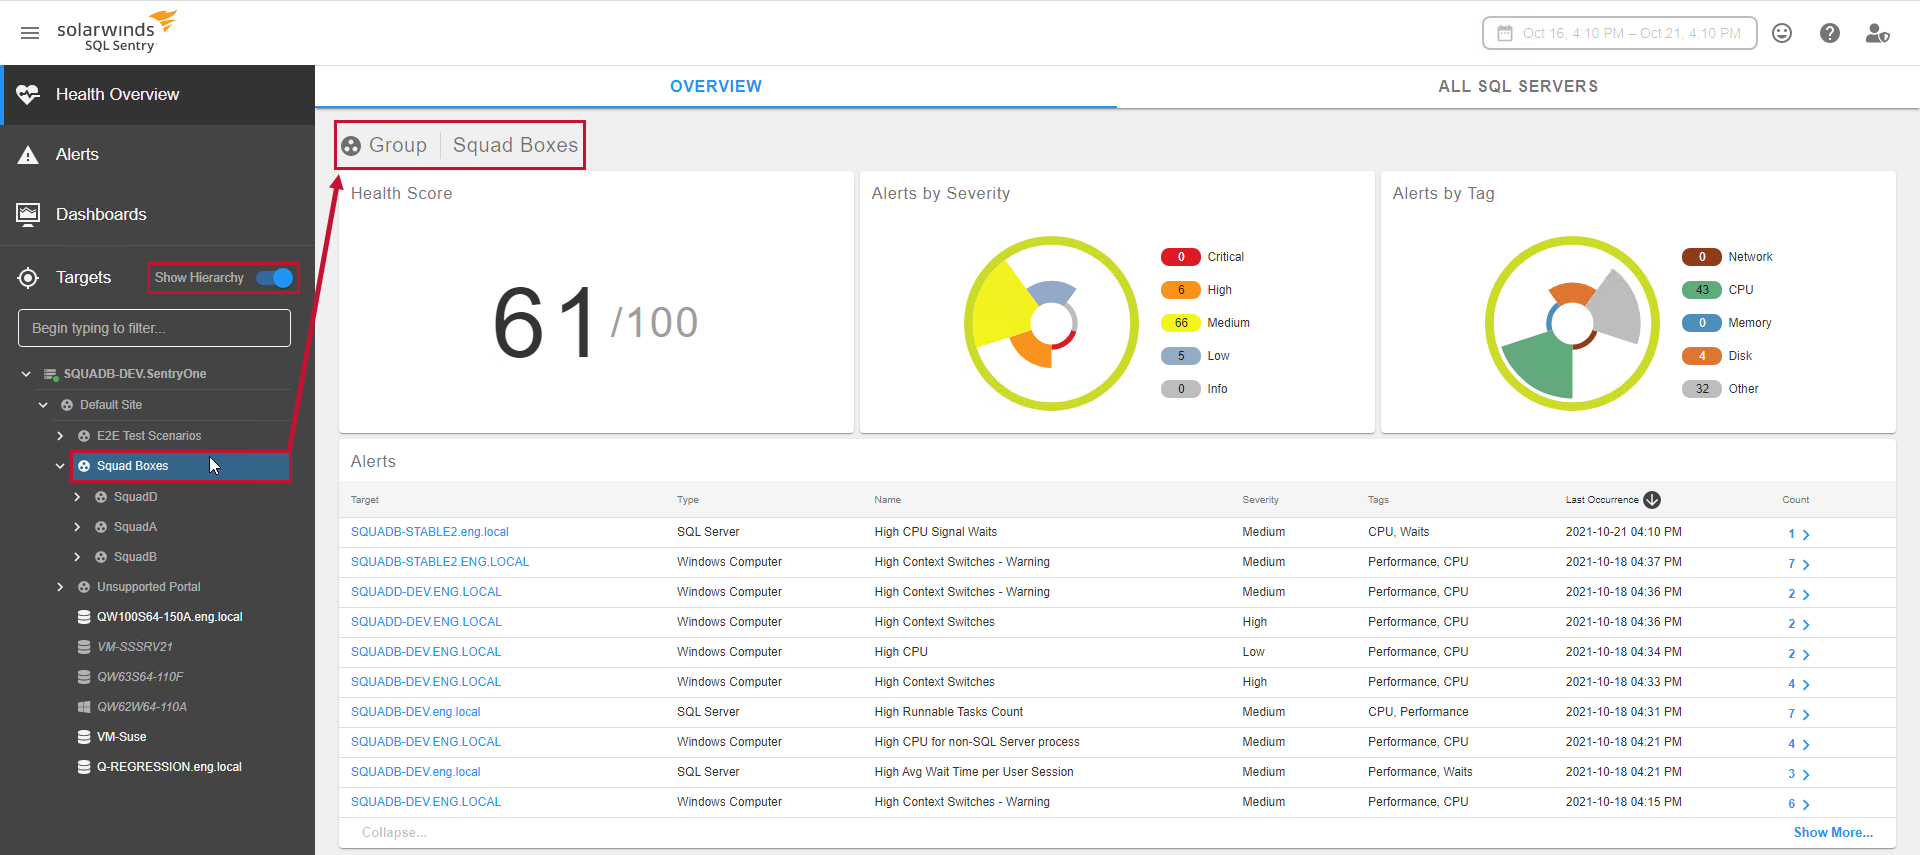 SQL Sentry Portal Health Overview for an Azure SQL DB Group selected from the expanded Default Site.